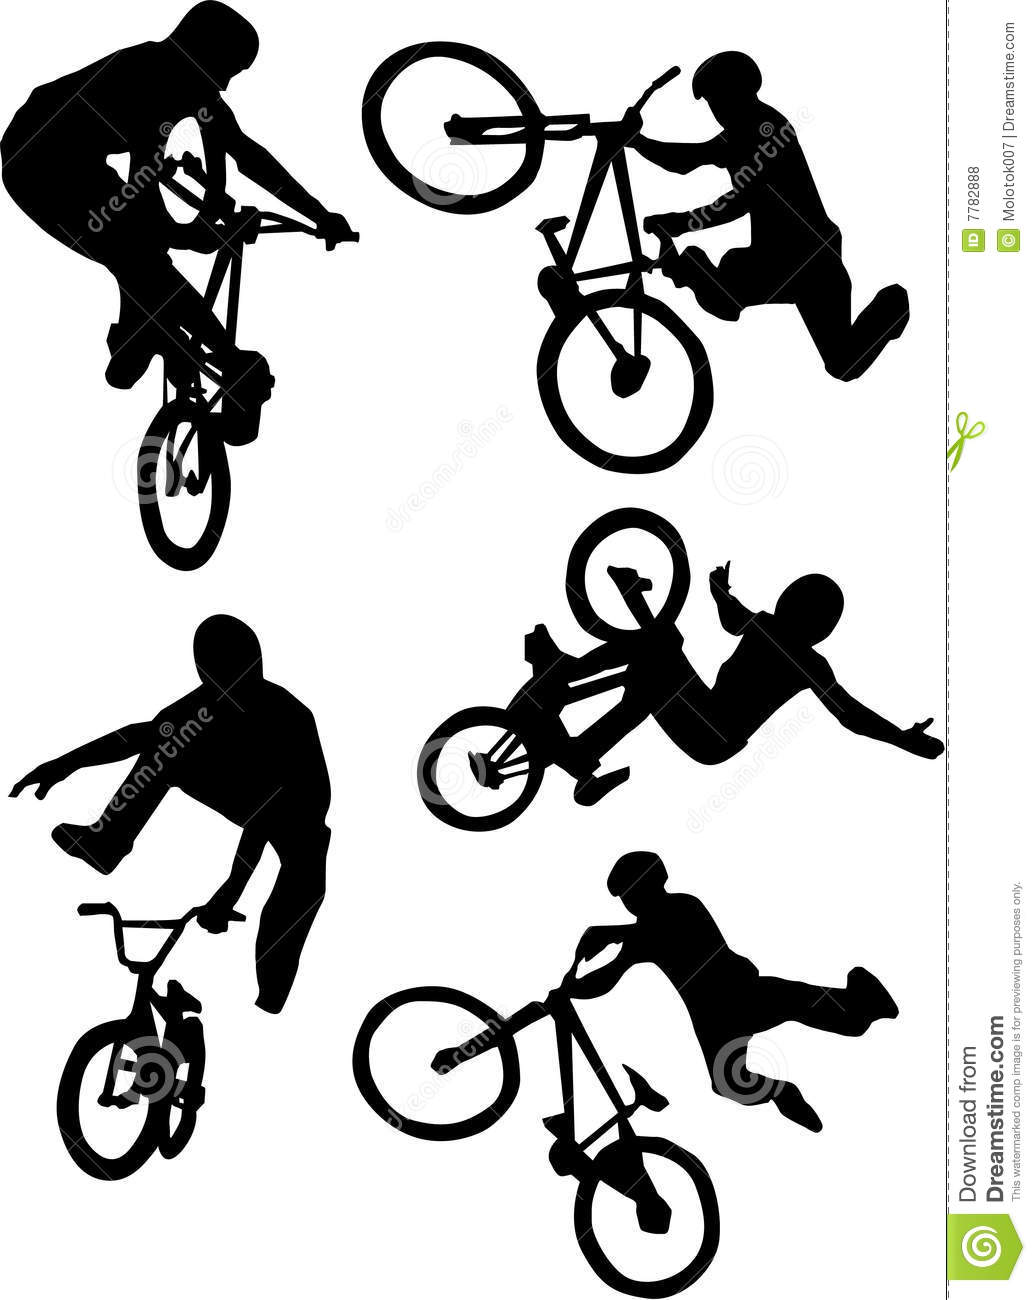 Silhouette Of Bmx Riders On A White Background  Vector Illustration